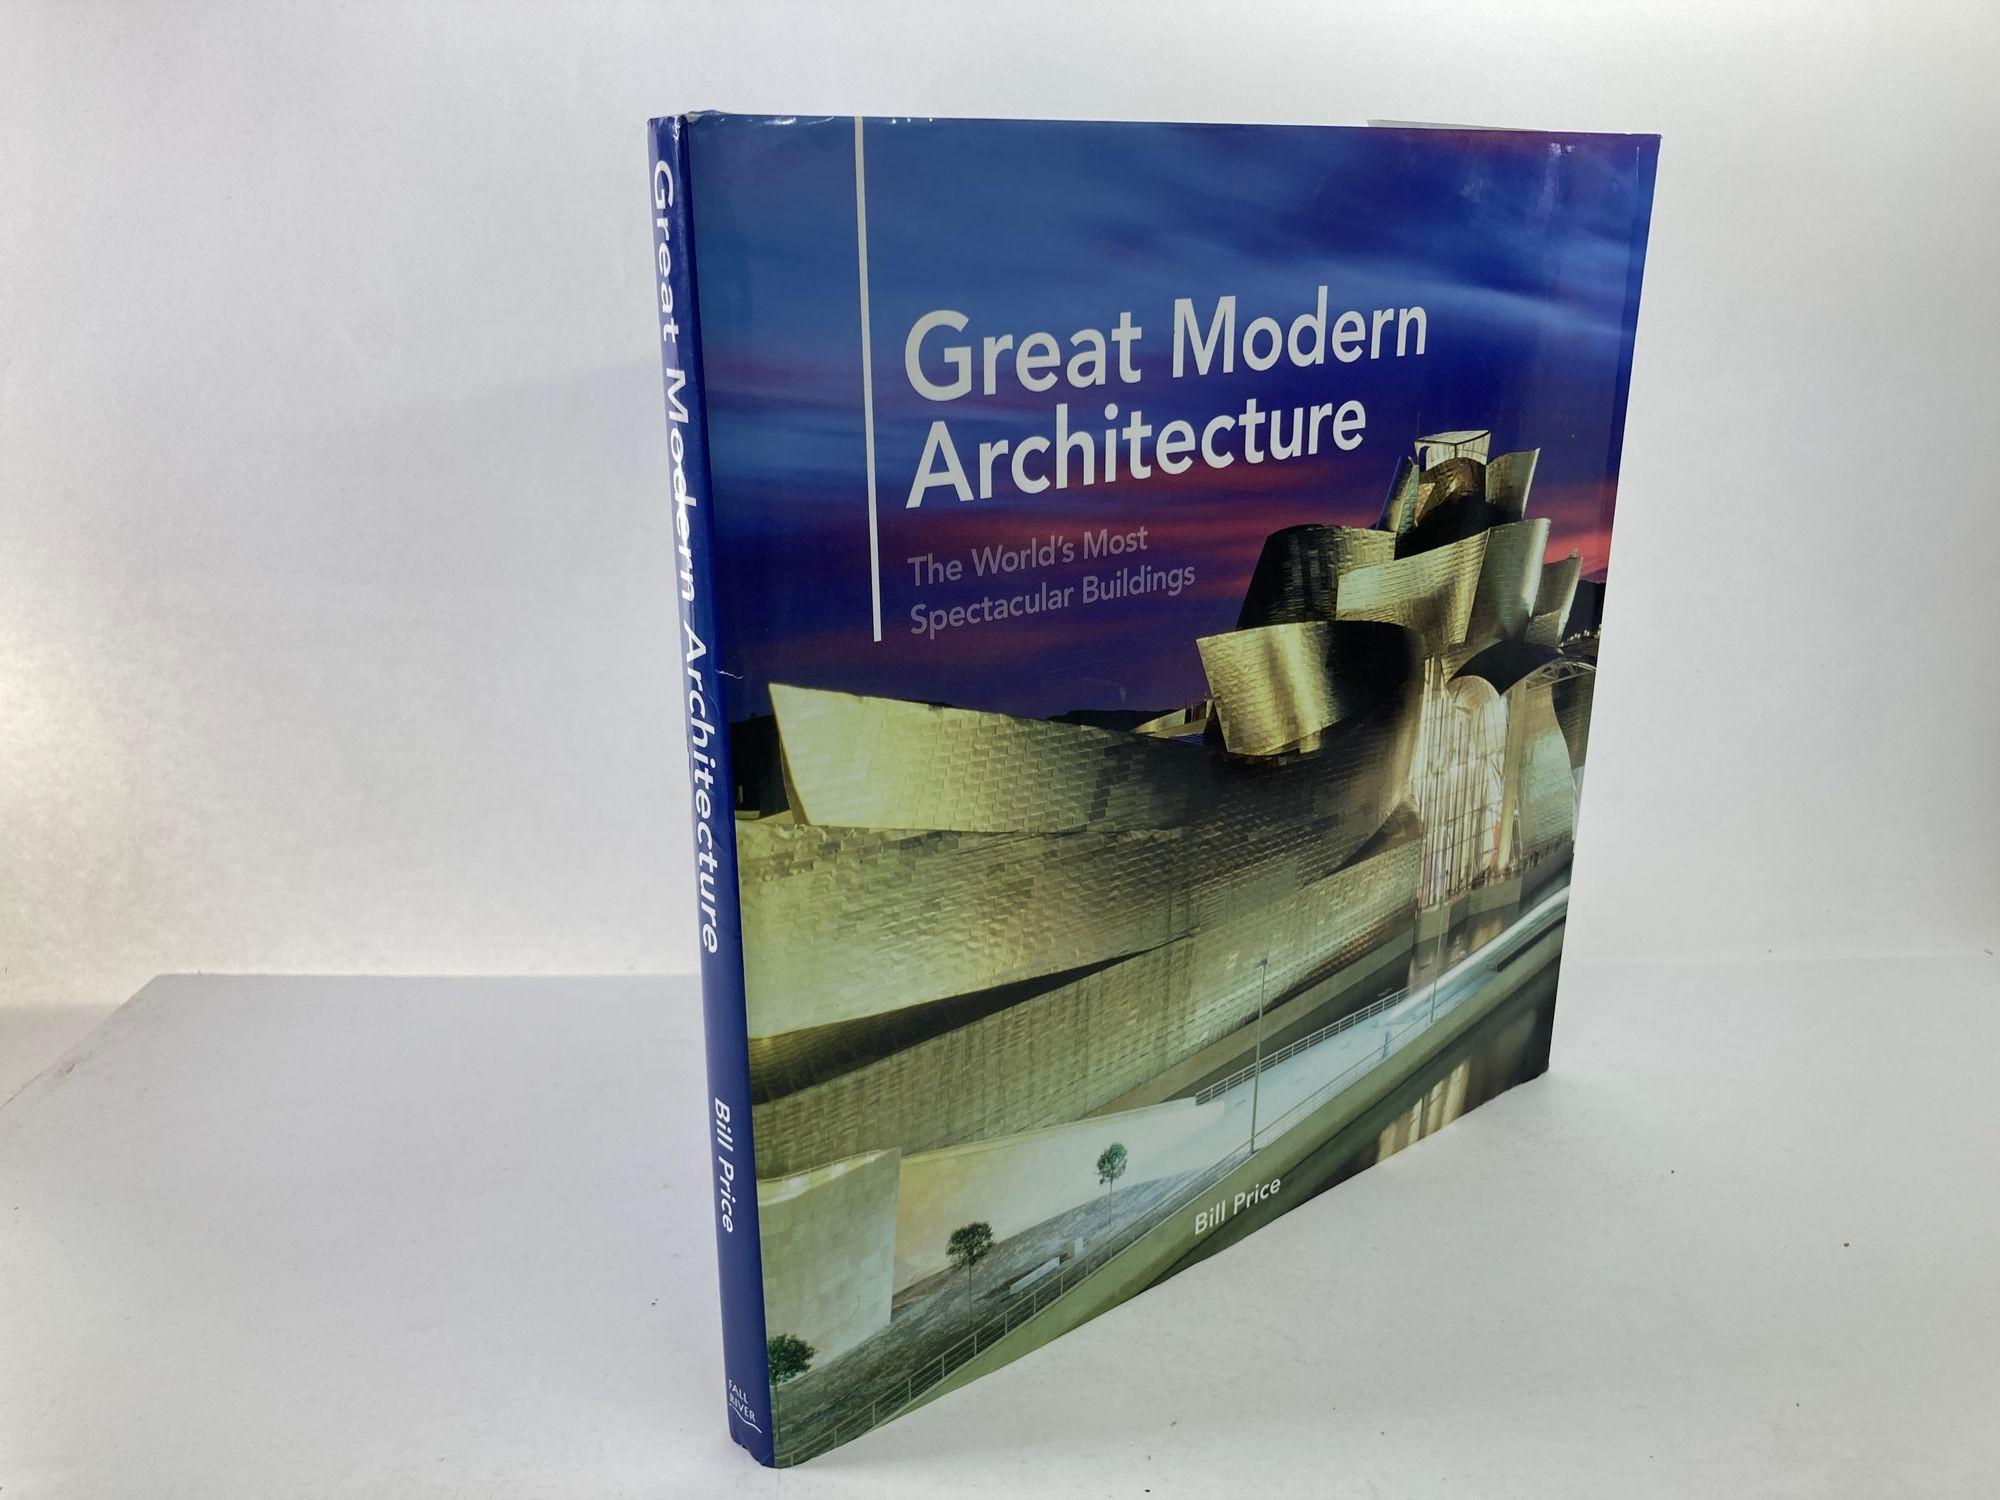 Great Modern Architecture: The World's Most Spectacar Buildings Hardcover – January 1, 2009 by Bill Price. From the Publisher 